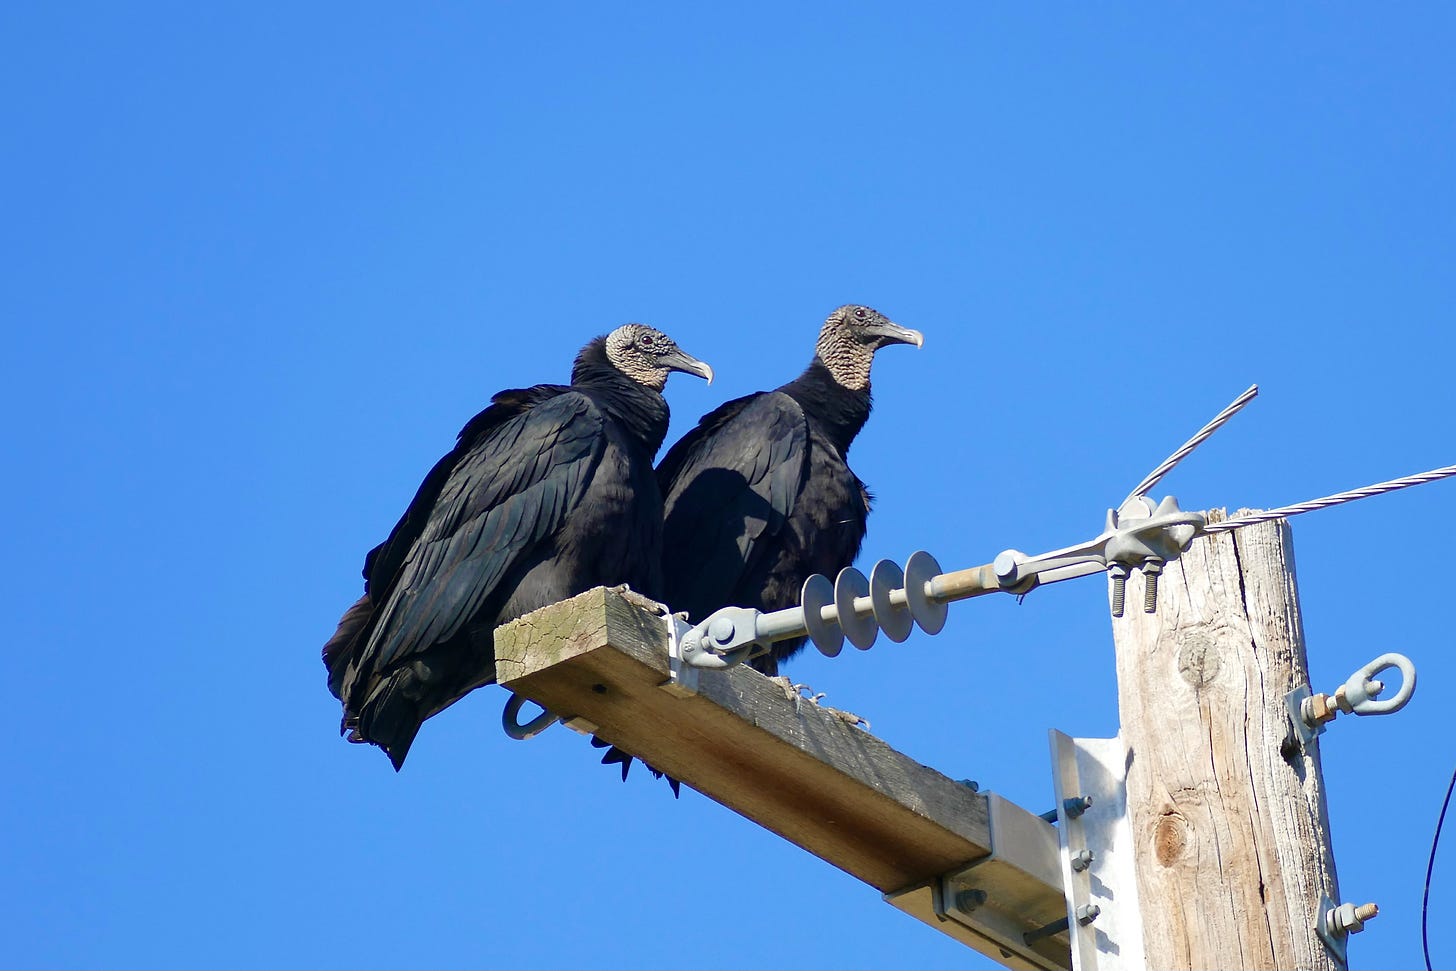 Two vultures on a telephone pole